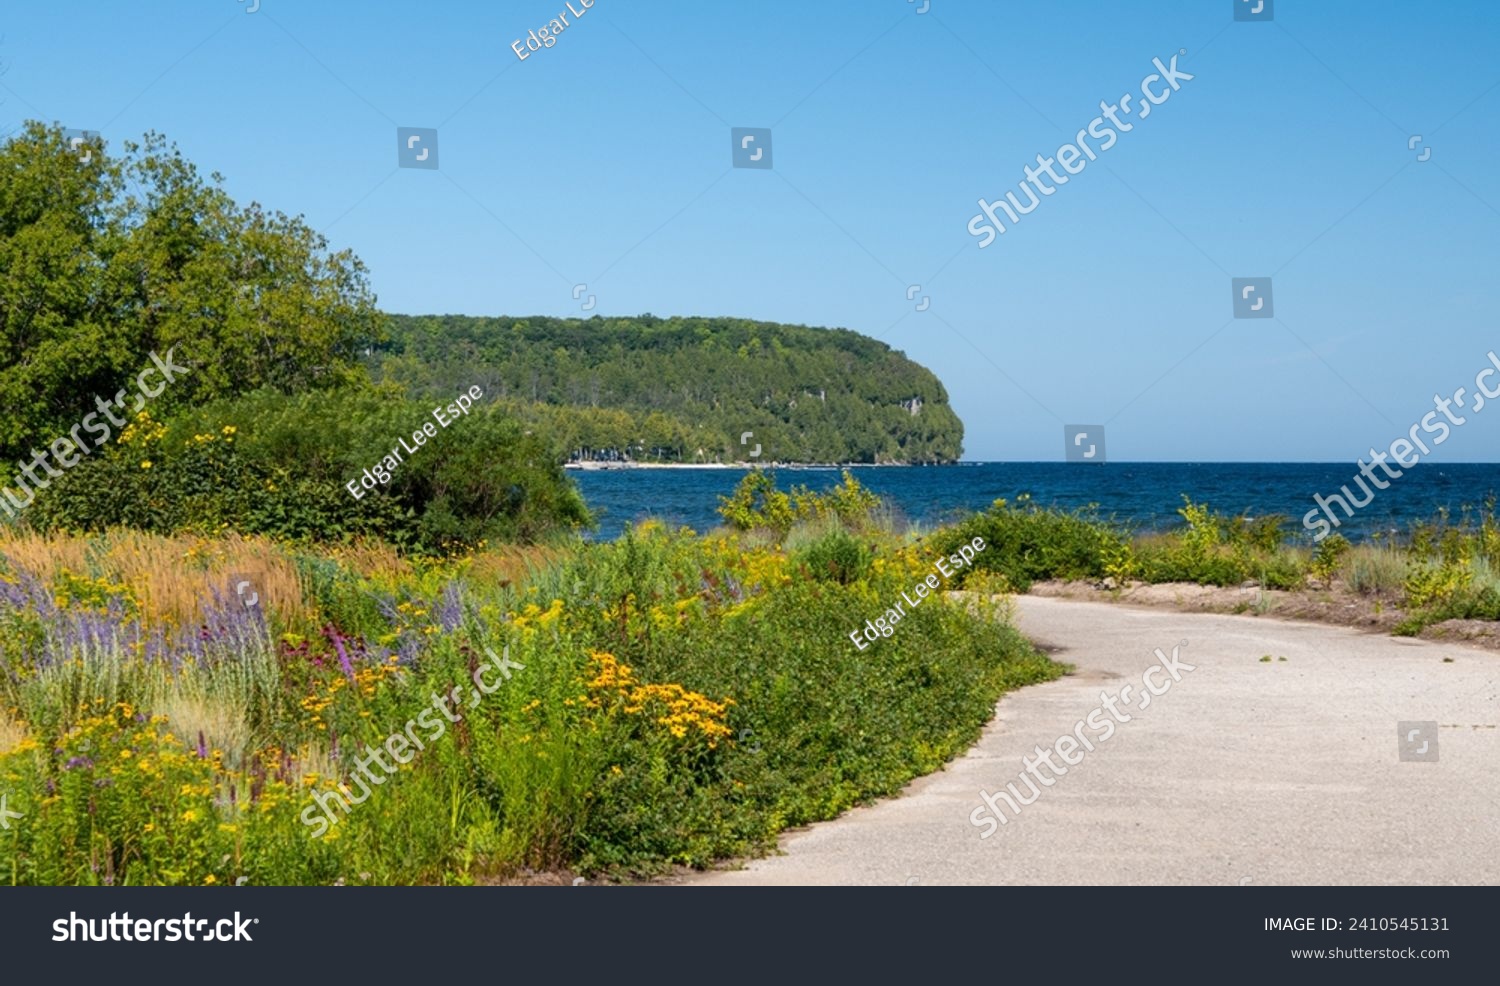 Beautiful colorful wild flowers along a path near the shore of a lake on a sunny day with clear blue sky.